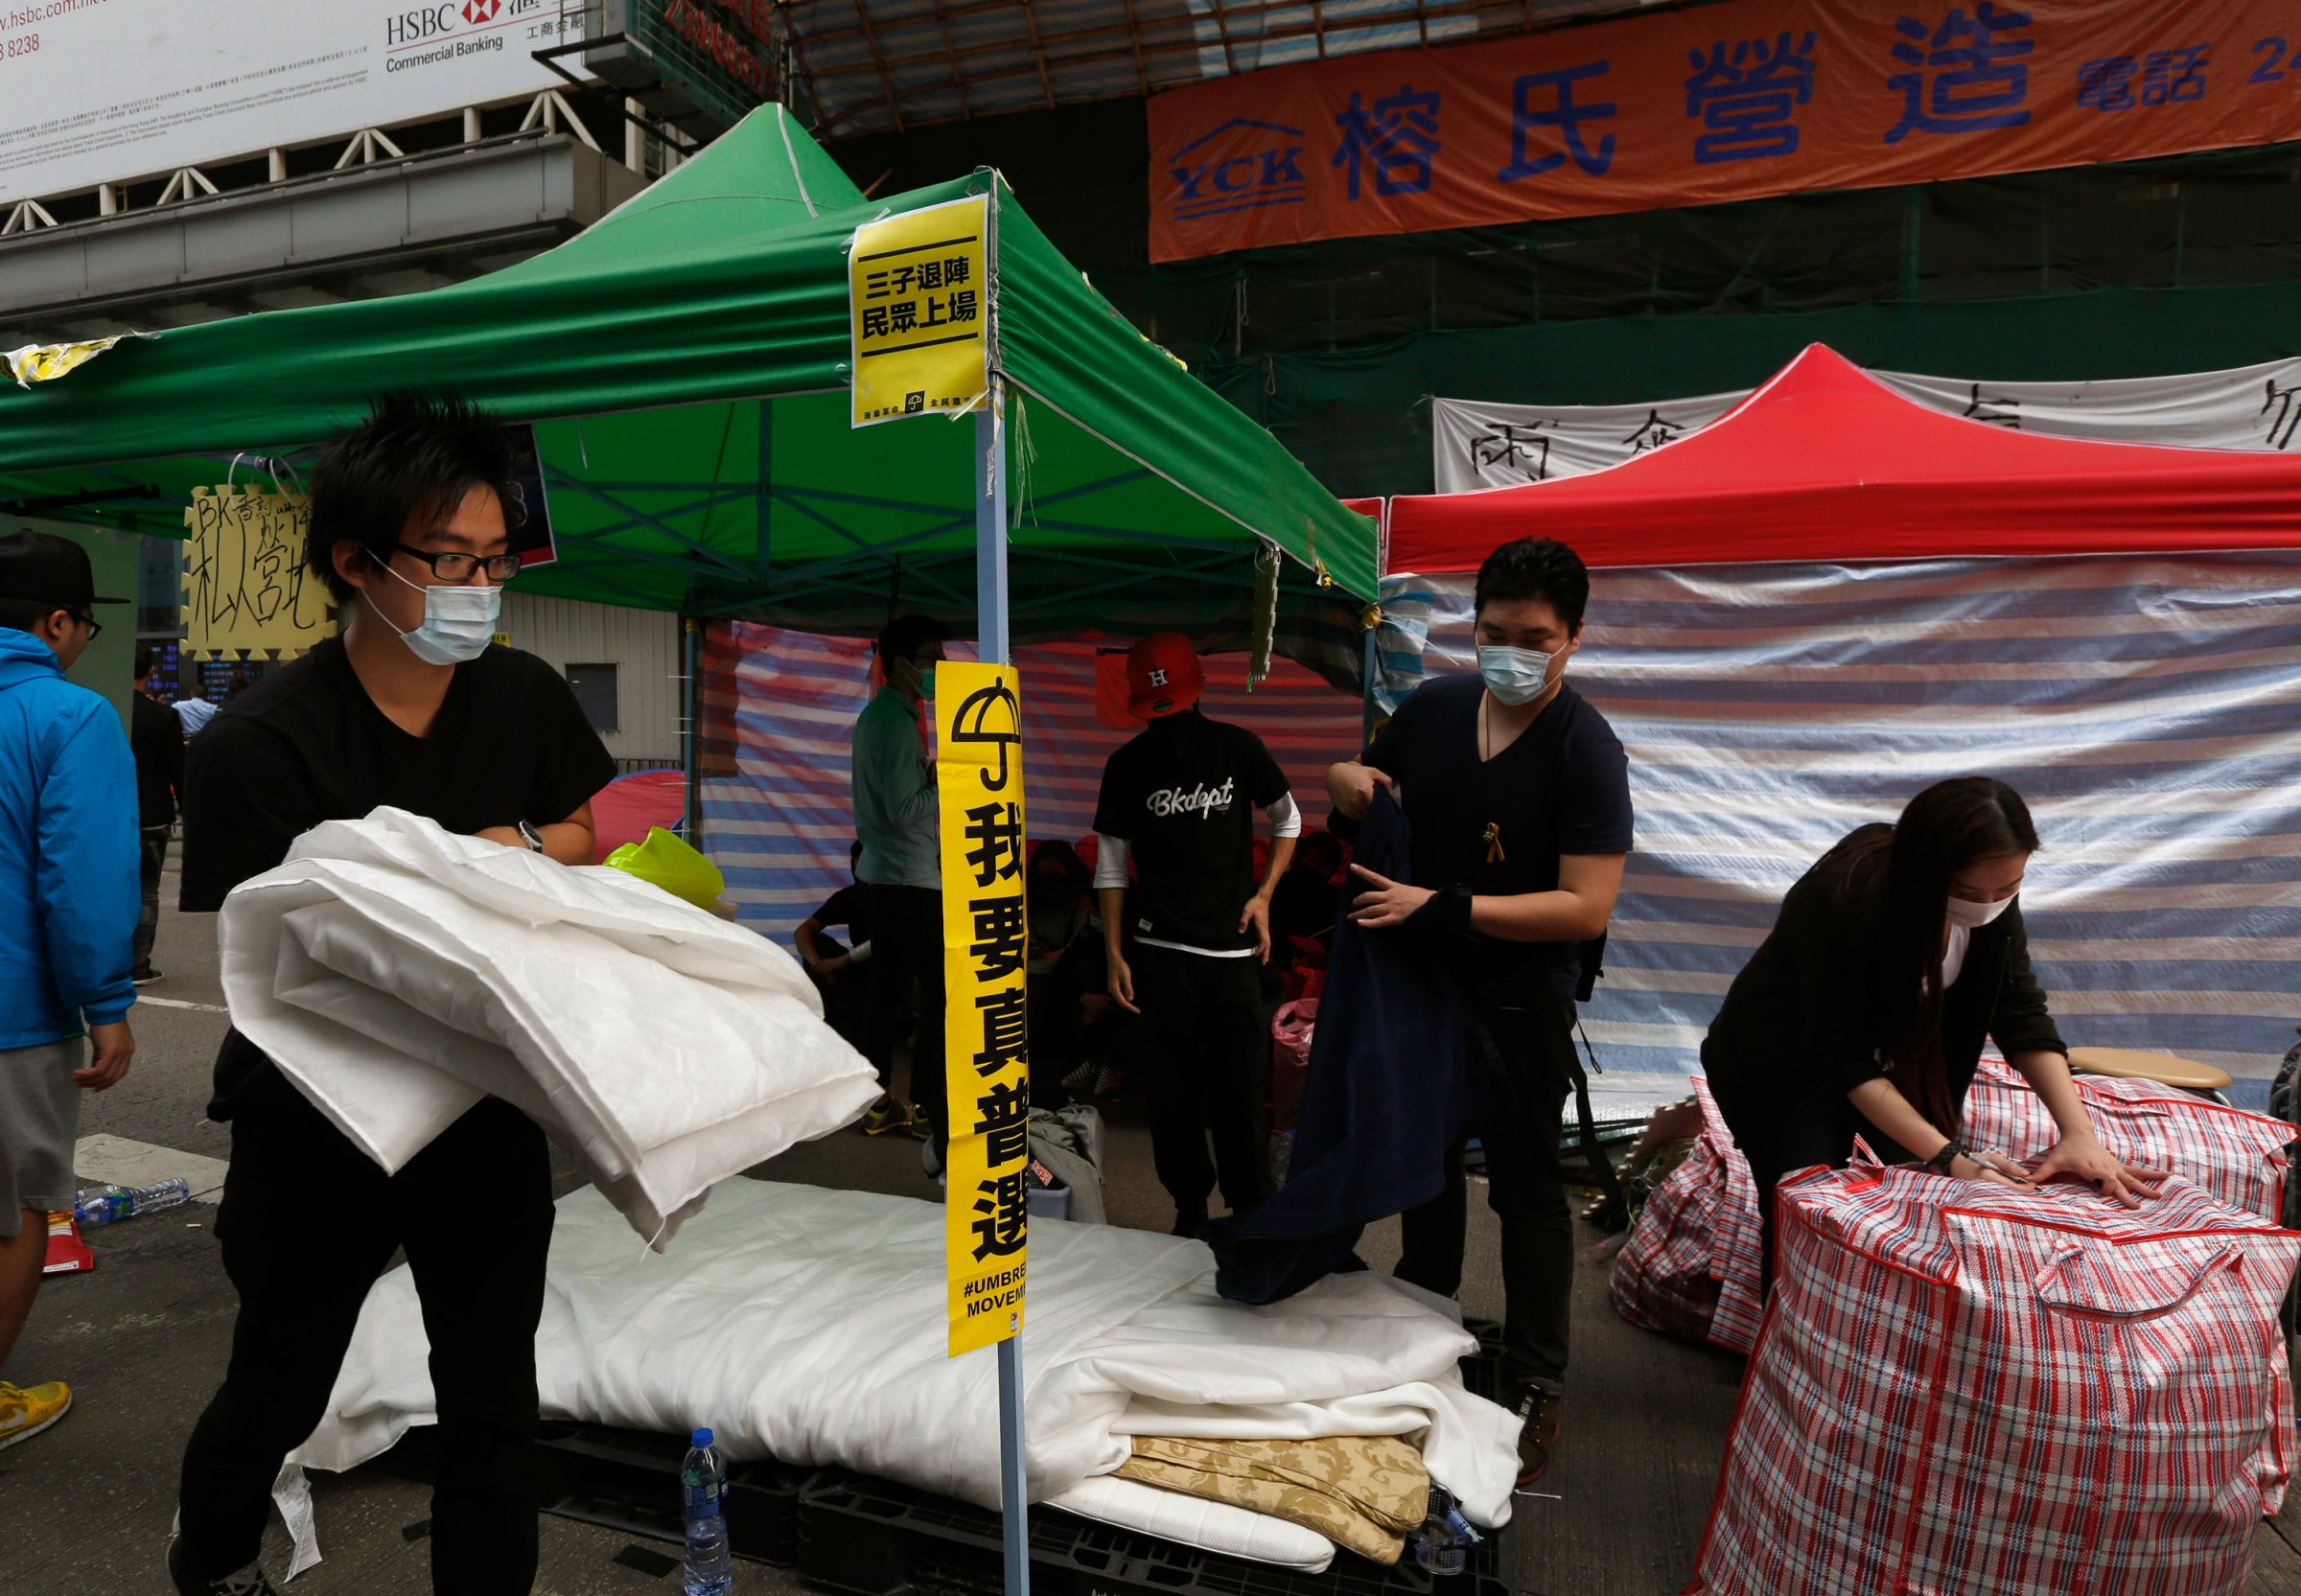 Masked pro-democracy protesters pack their belongings, before they are removed by bailiffs under a court injunction, at Mong Kok shopping district in Hong Kong